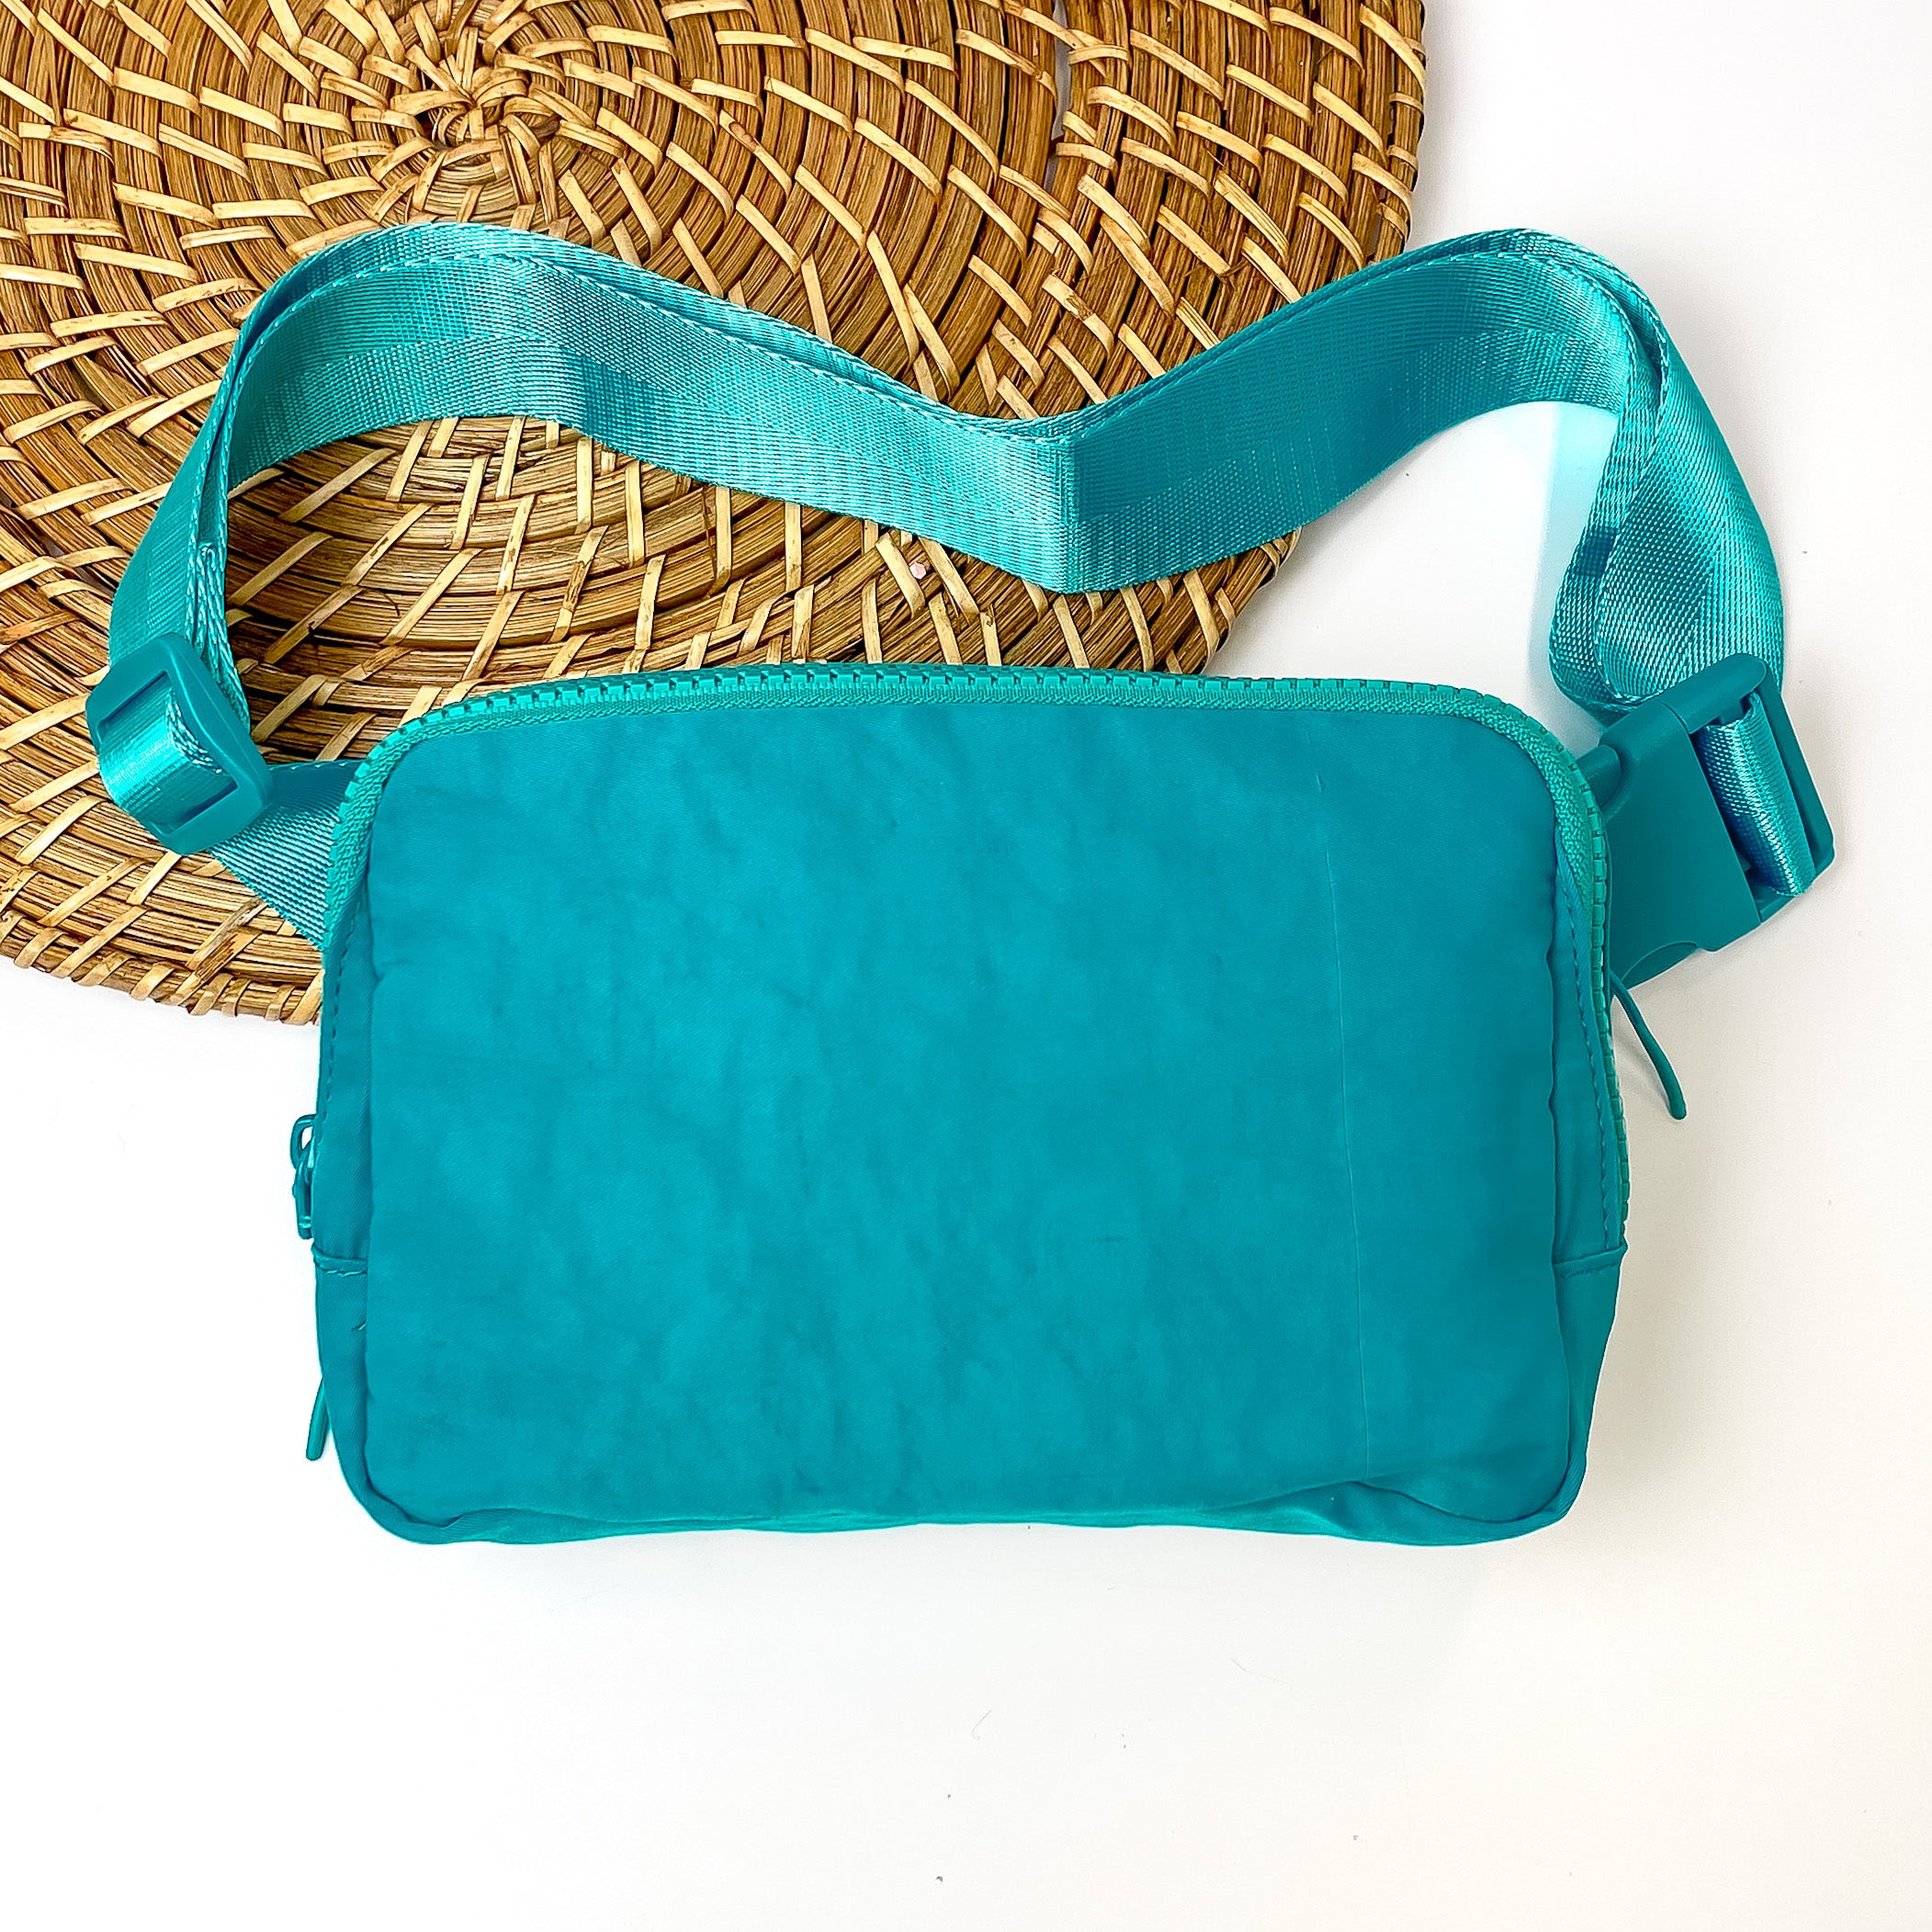 Pictured is a rectangle fanny pack with a top zipper with tassel in teal. This bag also includes a teal strap and teal accents. This bag is pictured on a white and brown patterned background. 